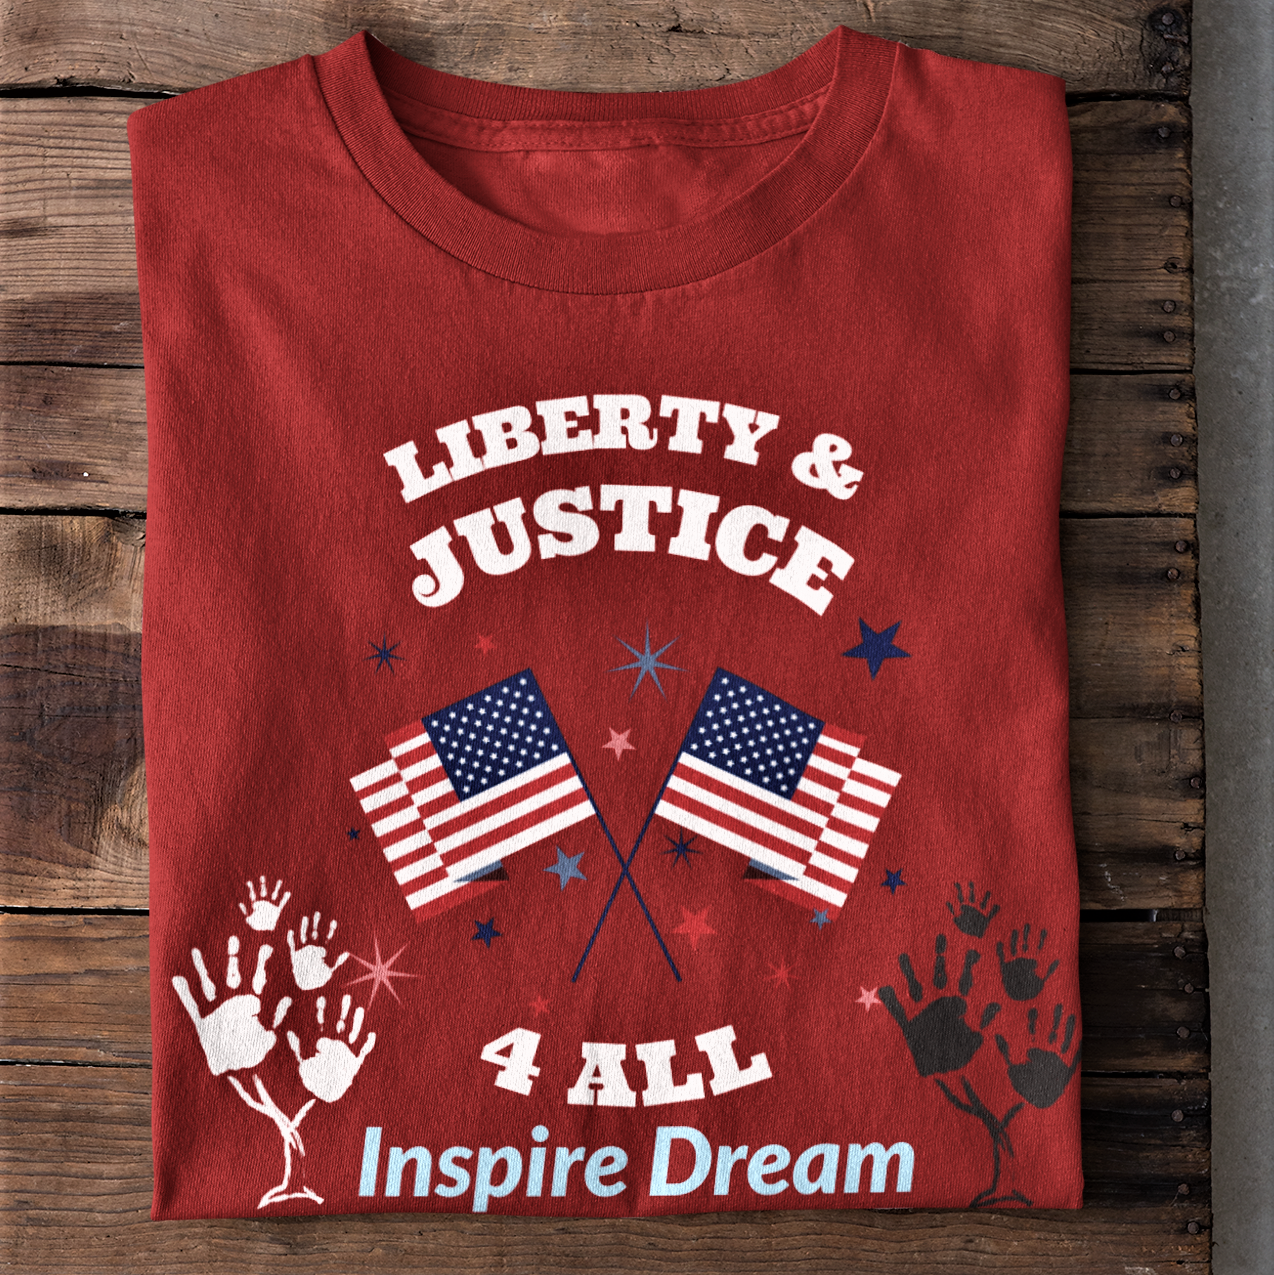 LIBERTY & JUSTICE 4 ALL Inspire Dream BELIEVE 4th of July t-shirt*